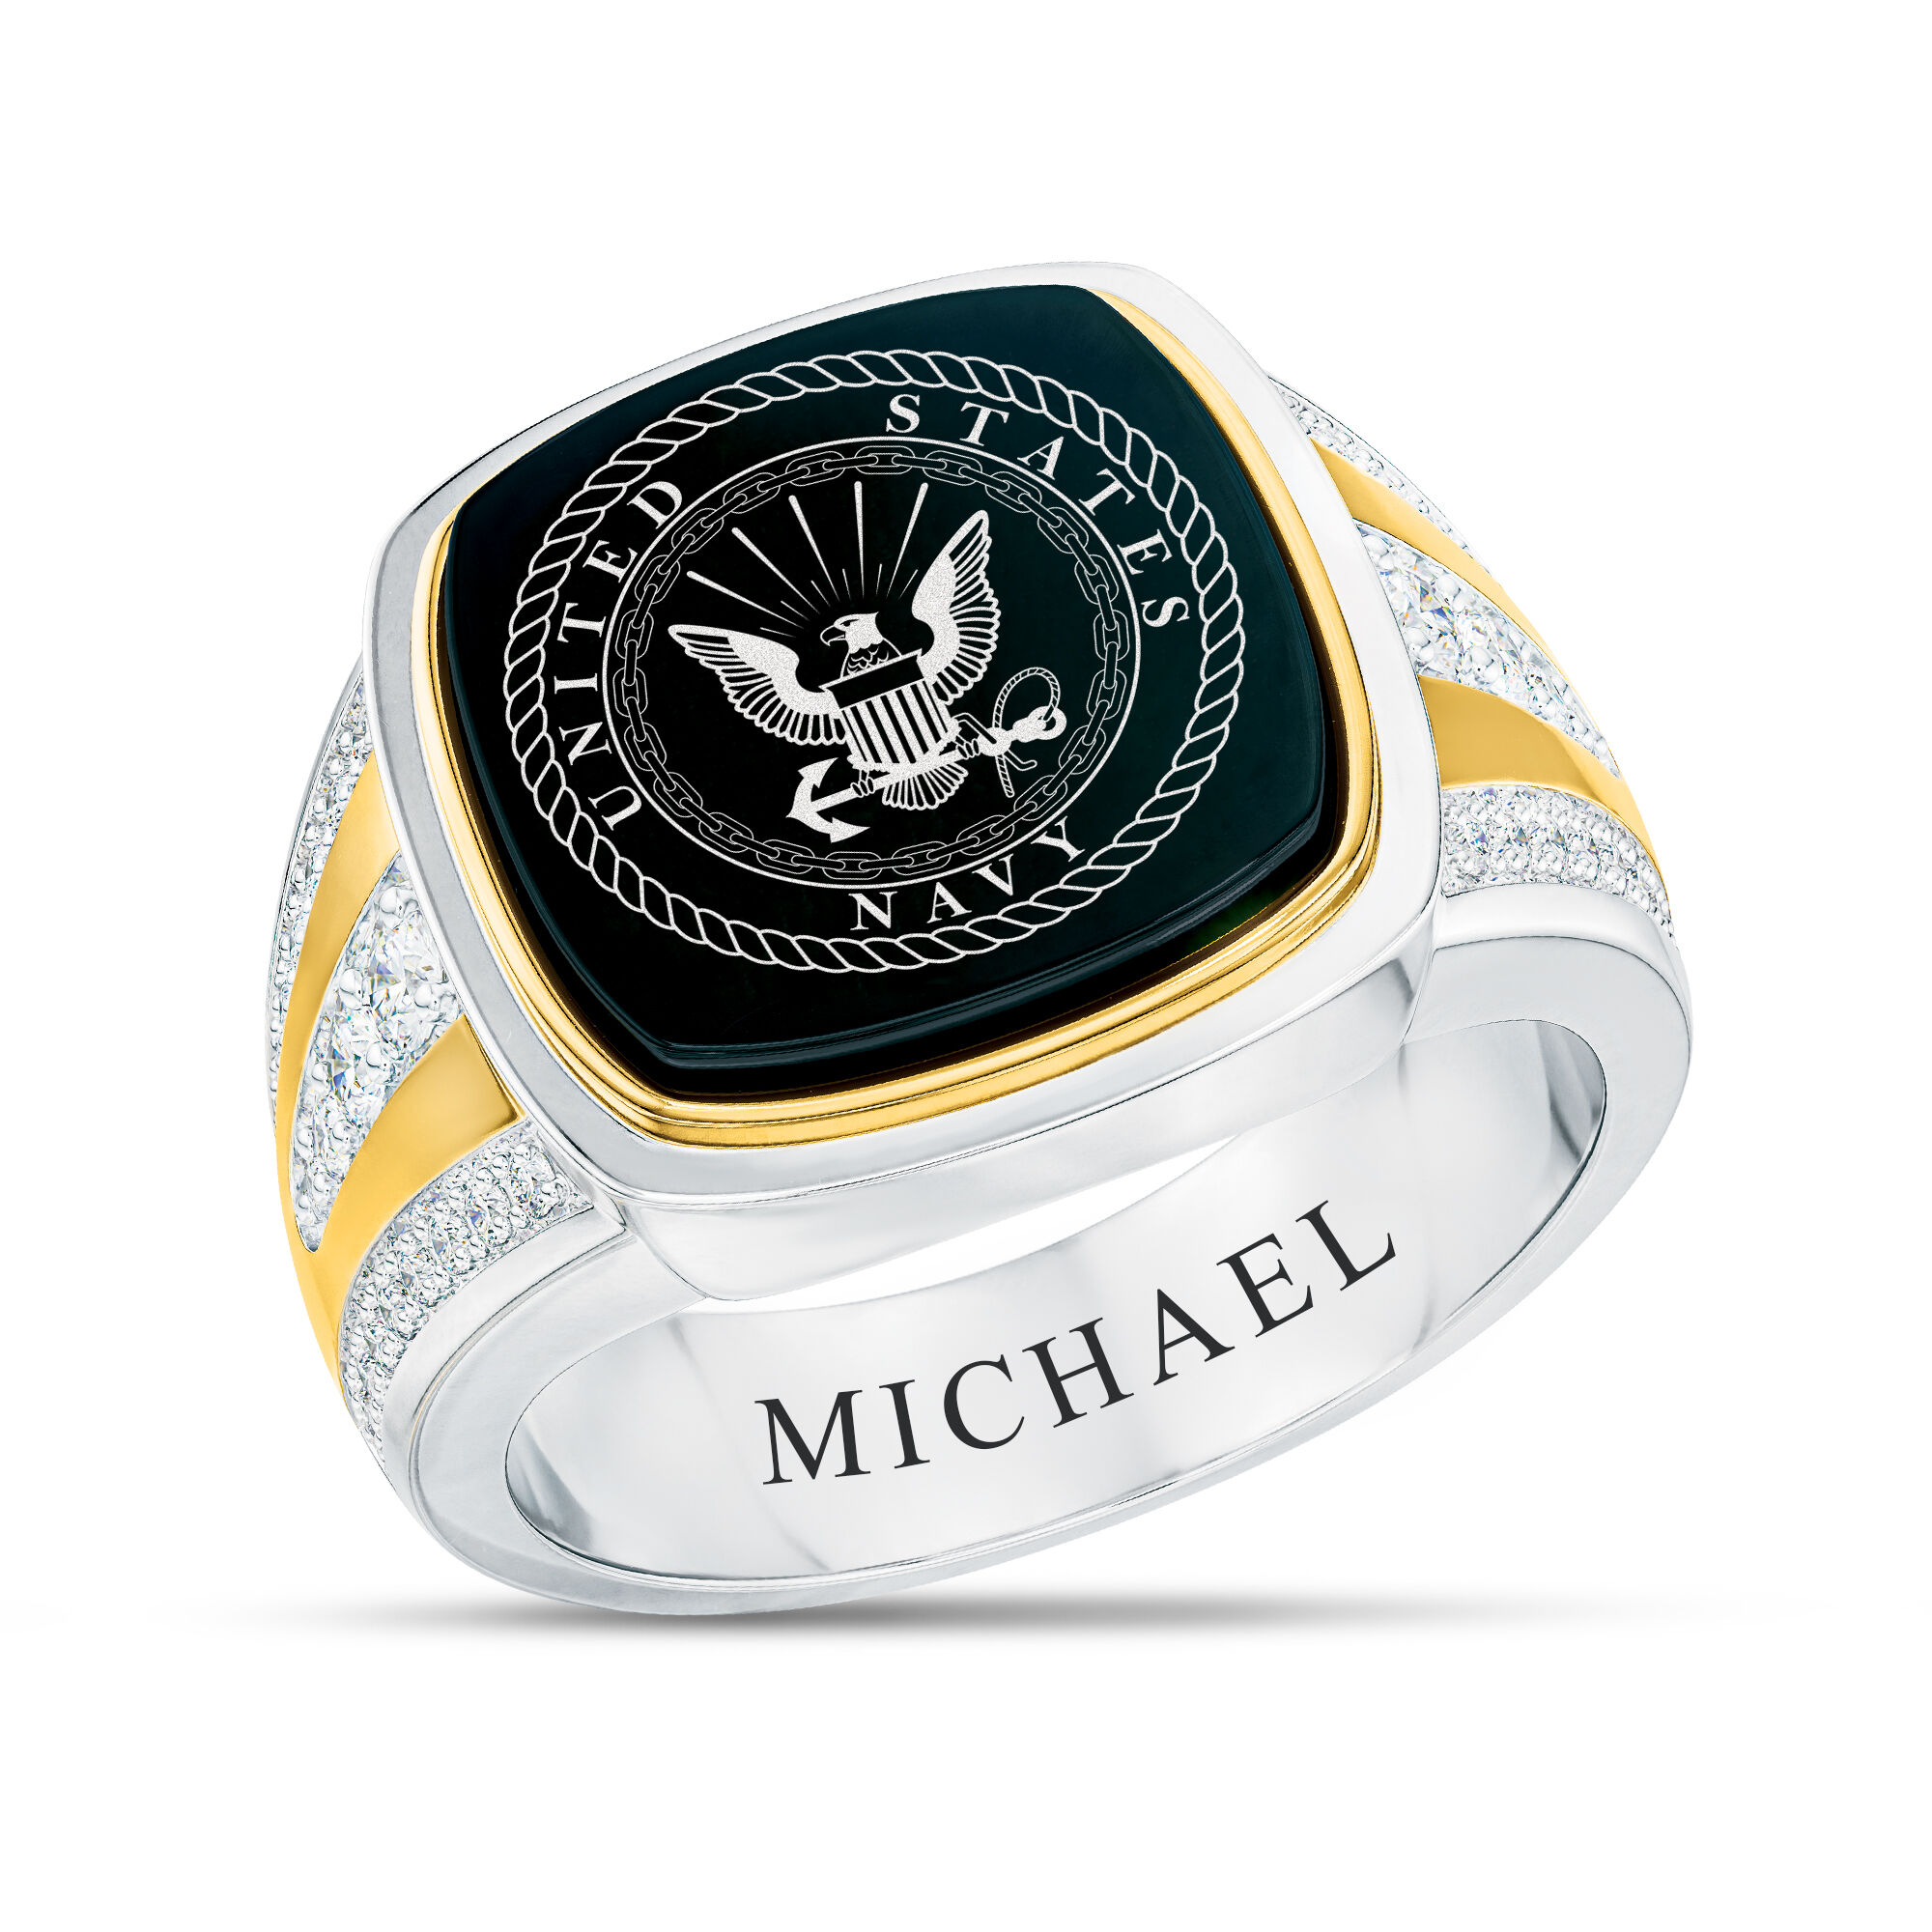 The US Navy Birthstone Ring 10347 0027 d april